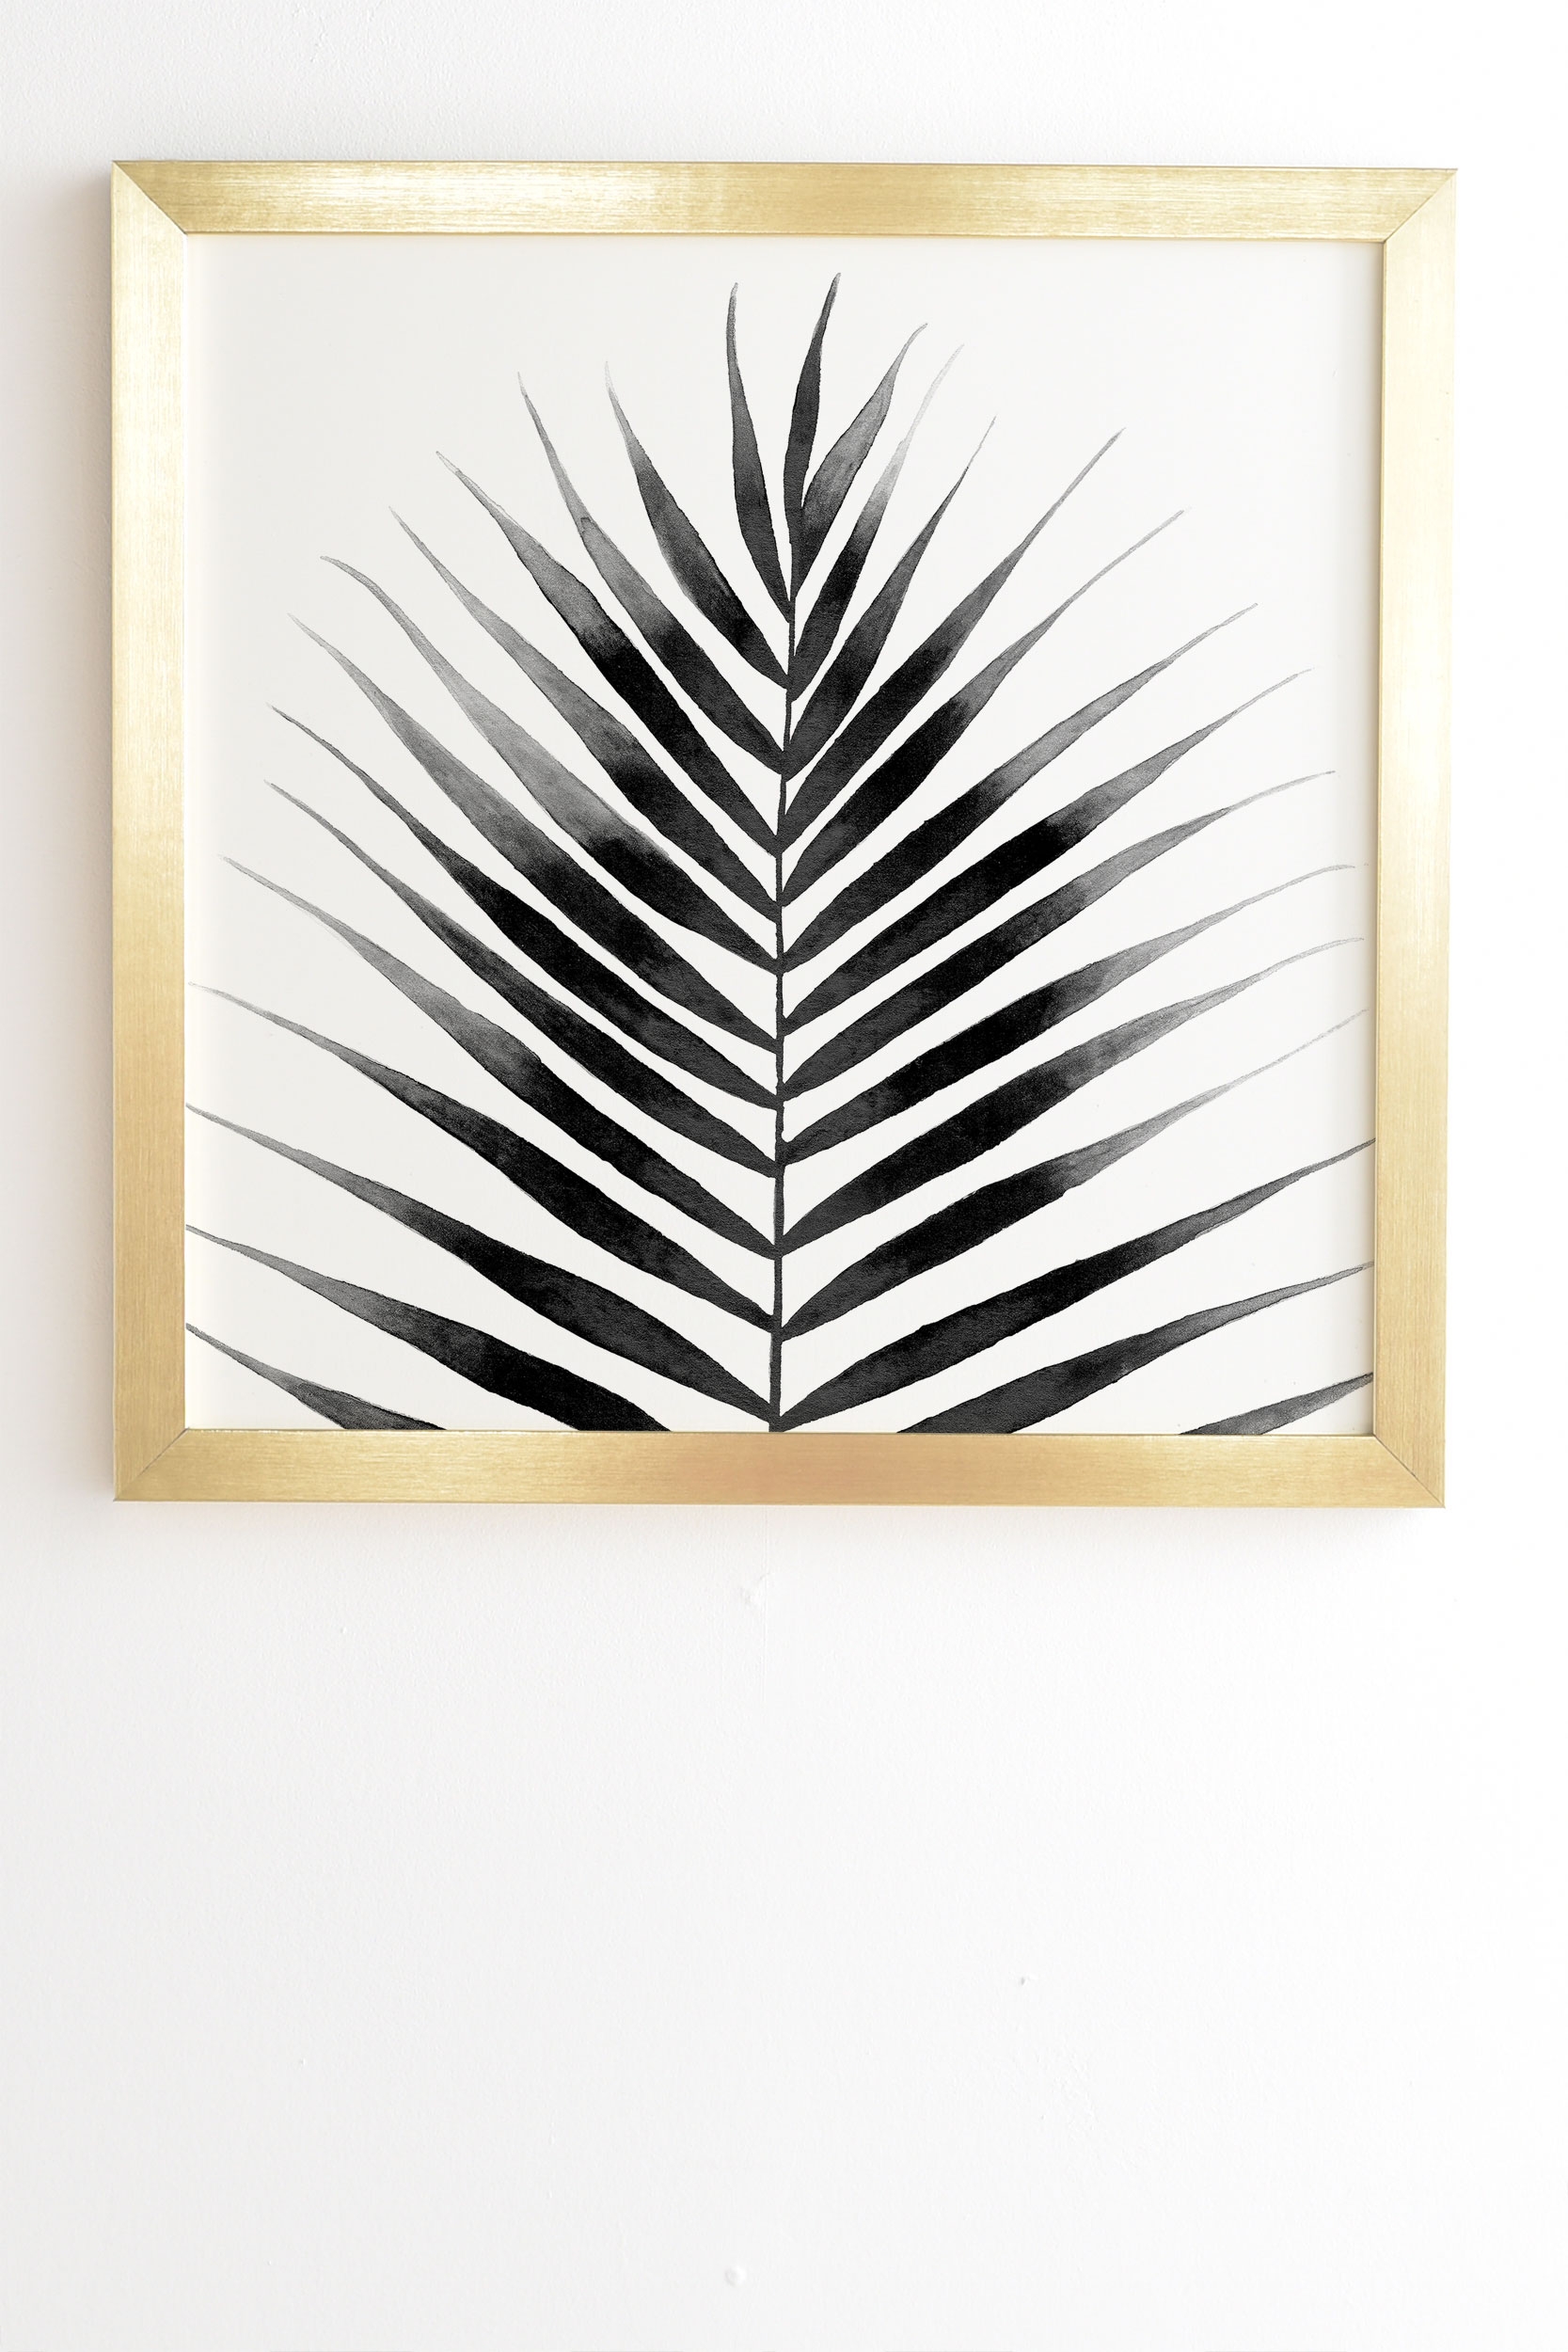 Palm Leaf Watercolor Black And White by Kris Kivu - Framed Wall Art Basic Gold 8" x 9.5" - Image 1